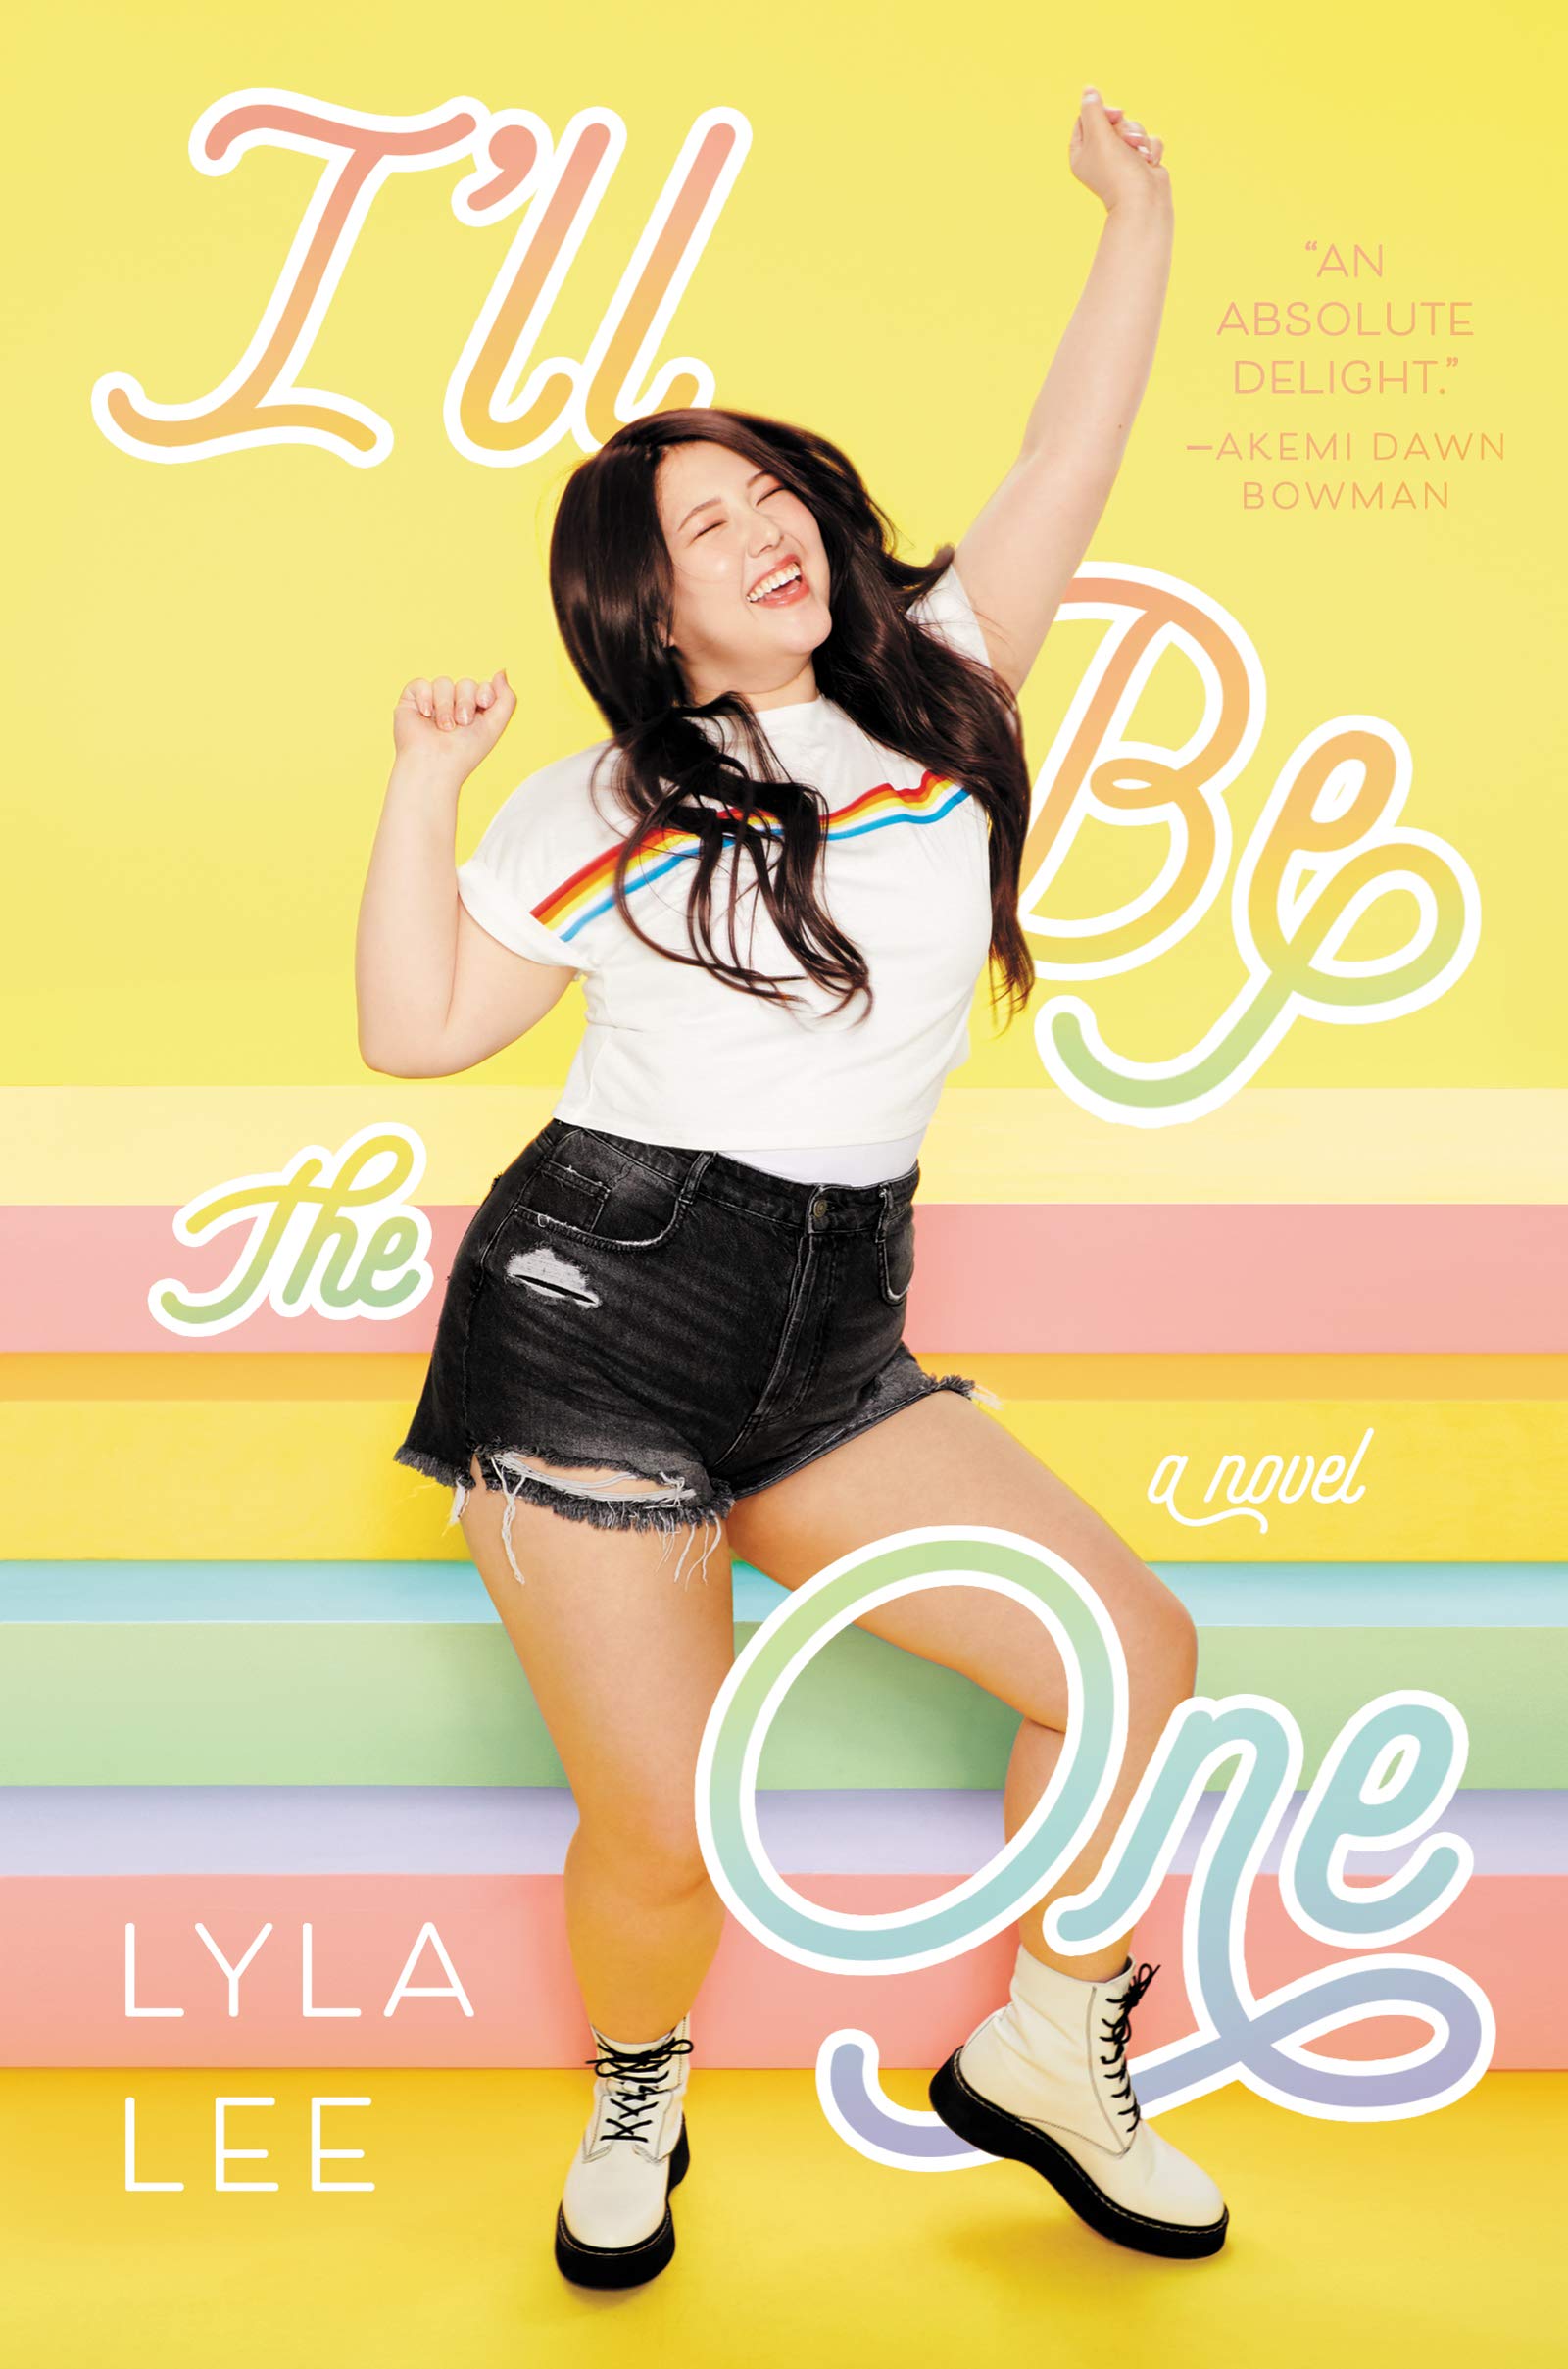 Cover image for "I'll be the one"